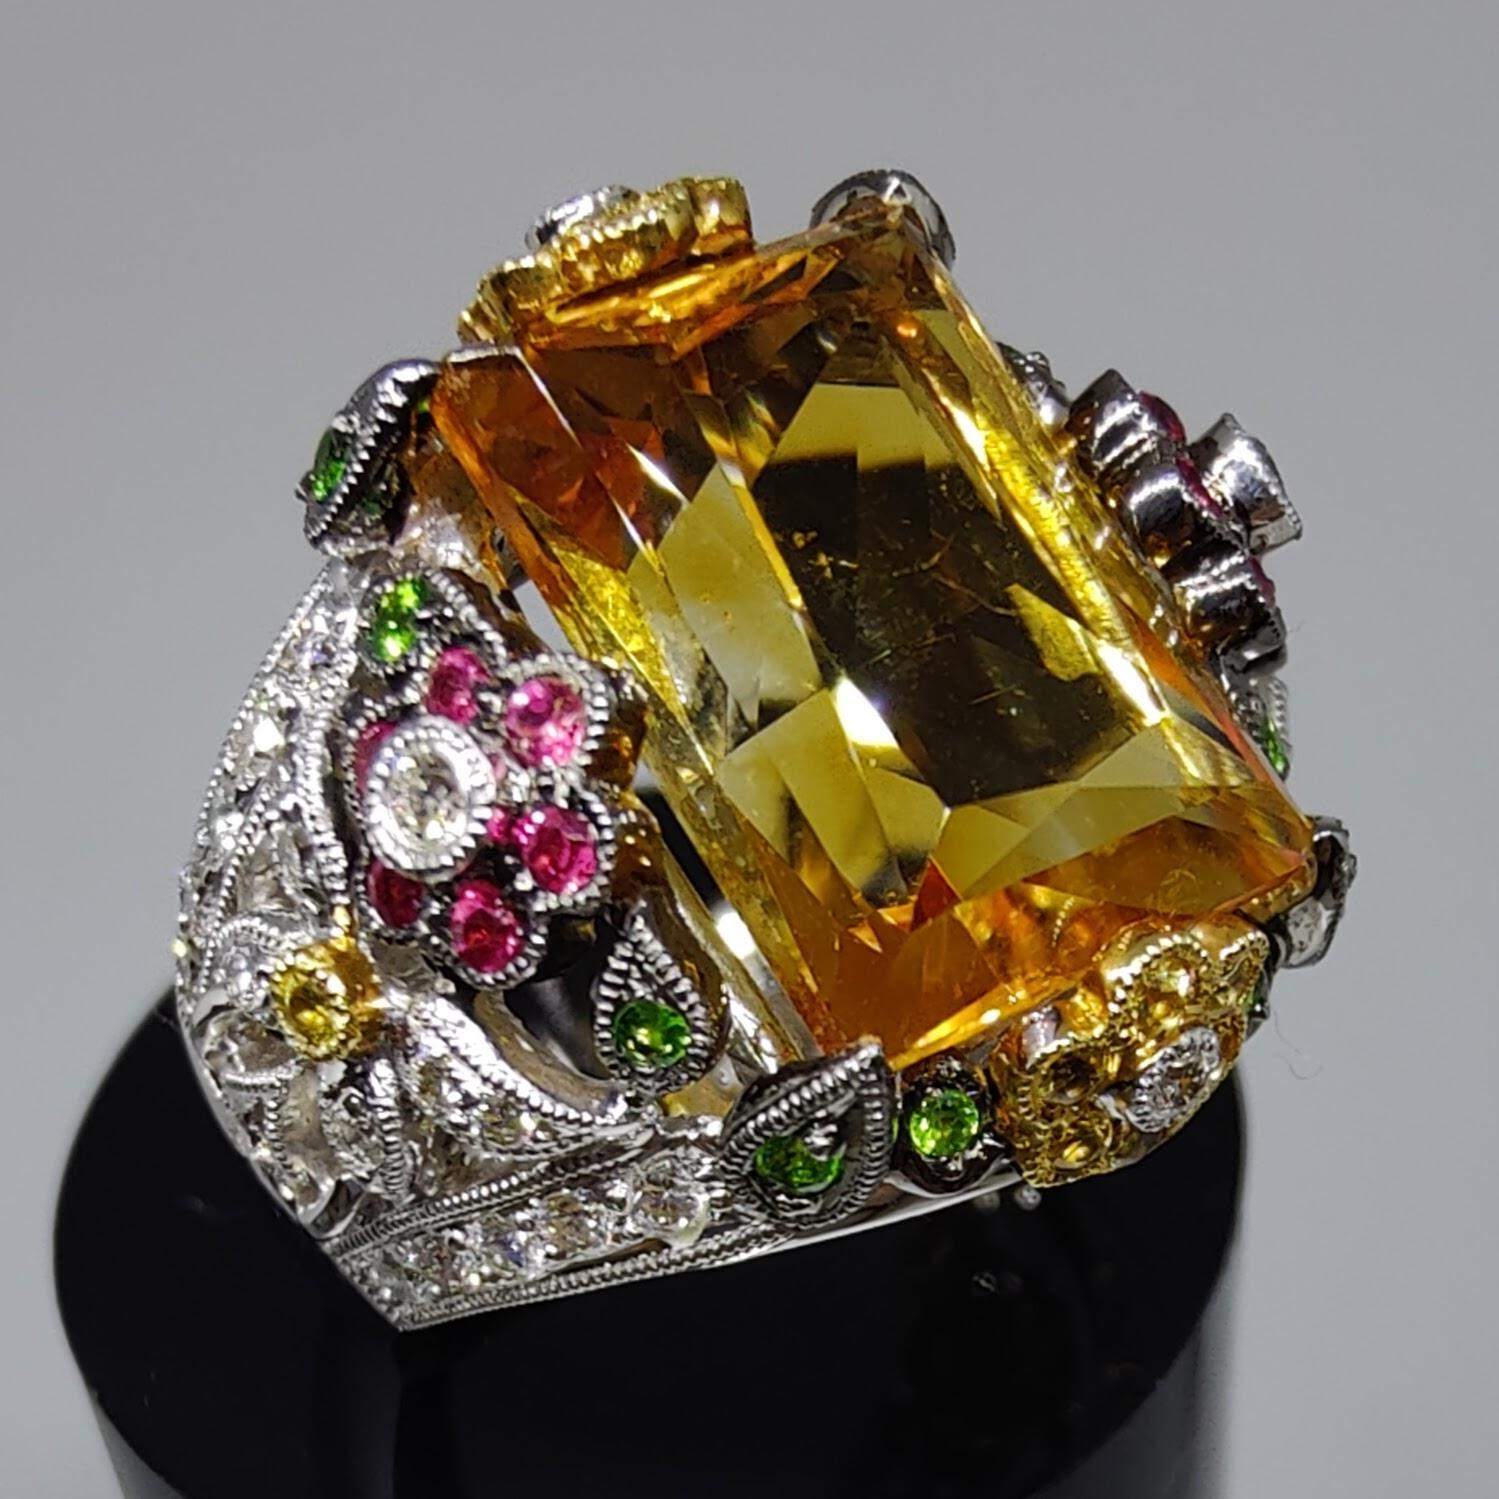 This stunning cocktail ring is sure to turn heads with its baroque style and sparkling gemstones. The centerpiece of the ring is a beautiful 11.35 carat topaz, surrounded by ruby and yellow sapphire flowers and green emerald leaves. The ring is